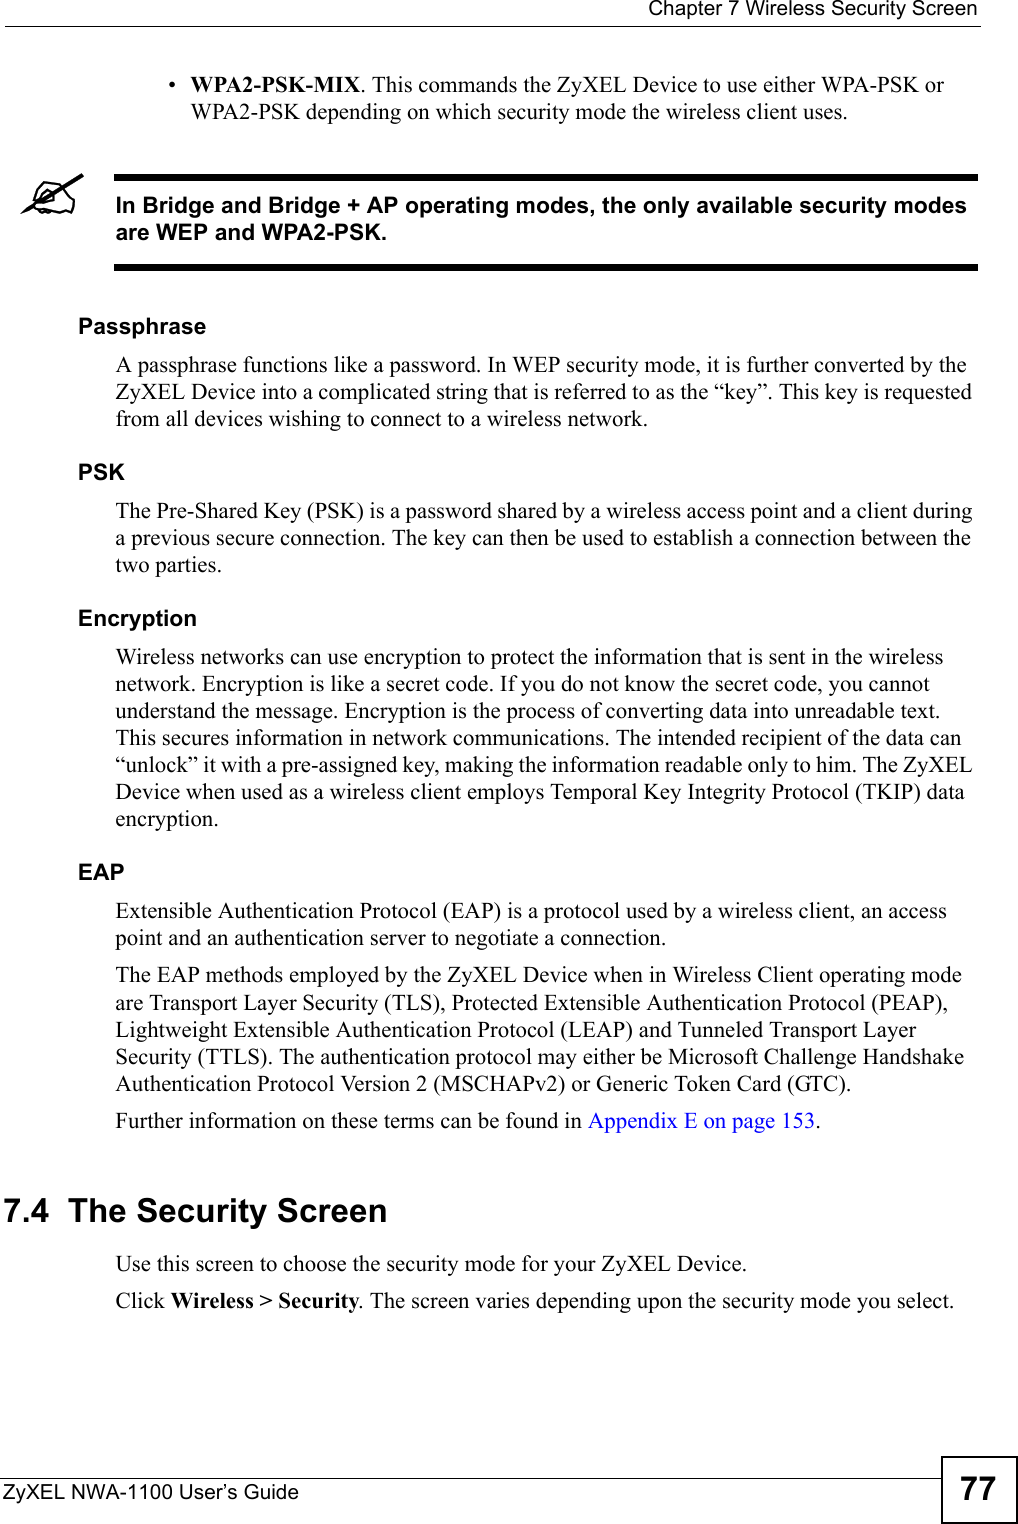  Chapter 7 Wireless Security ScreenZyXEL NWA-1100 User’s Guide 77•WPA2-PSK-MIX. This commands the ZyXEL Device to use either WPA-PSK or WPA2-PSK depending on which security mode the wireless client uses.&quot;In Bridge and Bridge + AP operating modes, the only available security modes are WEP and WPA2-PSK.PassphraseA passphrase functions like a password. In WEP security mode, it is further converted by the ZyXEL Device into a complicated string that is referred to as the “key”. This key is requested from all devices wishing to connect to a wireless network.PSKThe Pre-Shared Key (PSK) is a password shared by a wireless access point and a client during a previous secure connection. The key can then be used to establish a connection between the two parties.EncryptionWireless networks can use encryption to protect the information that is sent in the wireless network. Encryption is like a secret code. If you do not know the secret code, you cannot understand the message. Encryption is the process of converting data into unreadable text. This secures information in network communications. The intended recipient of the data can “unlock” it with a pre-assigned key, making the information readable only to him. The ZyXEL Device when used as a wireless client employs Temporal Key Integrity Protocol (TKIP) data encryption.EAPExtensible Authentication Protocol (EAP) is a protocol used by a wireless client, an access point and an authentication server to negotiate a connection. The EAP methods employed by the ZyXEL Device when in Wireless Client operating mode are Transport Layer Security (TLS), Protected Extensible Authentication Protocol (PEAP), Lightweight Extensible Authentication Protocol (LEAP) and Tunneled Transport Layer Security (TTLS). The authentication protocol may either be Microsoft Challenge Handshake Authentication Protocol Version 2 (MSCHAPv2) or Generic Token Card (GTC).Further information on these terms can be found in Appendix E on page 153.    7.4  The Security ScreenUse this screen to choose the security mode for your ZyXEL Device. Click Wireless &gt; Security. The screen varies depending upon the security mode you select.